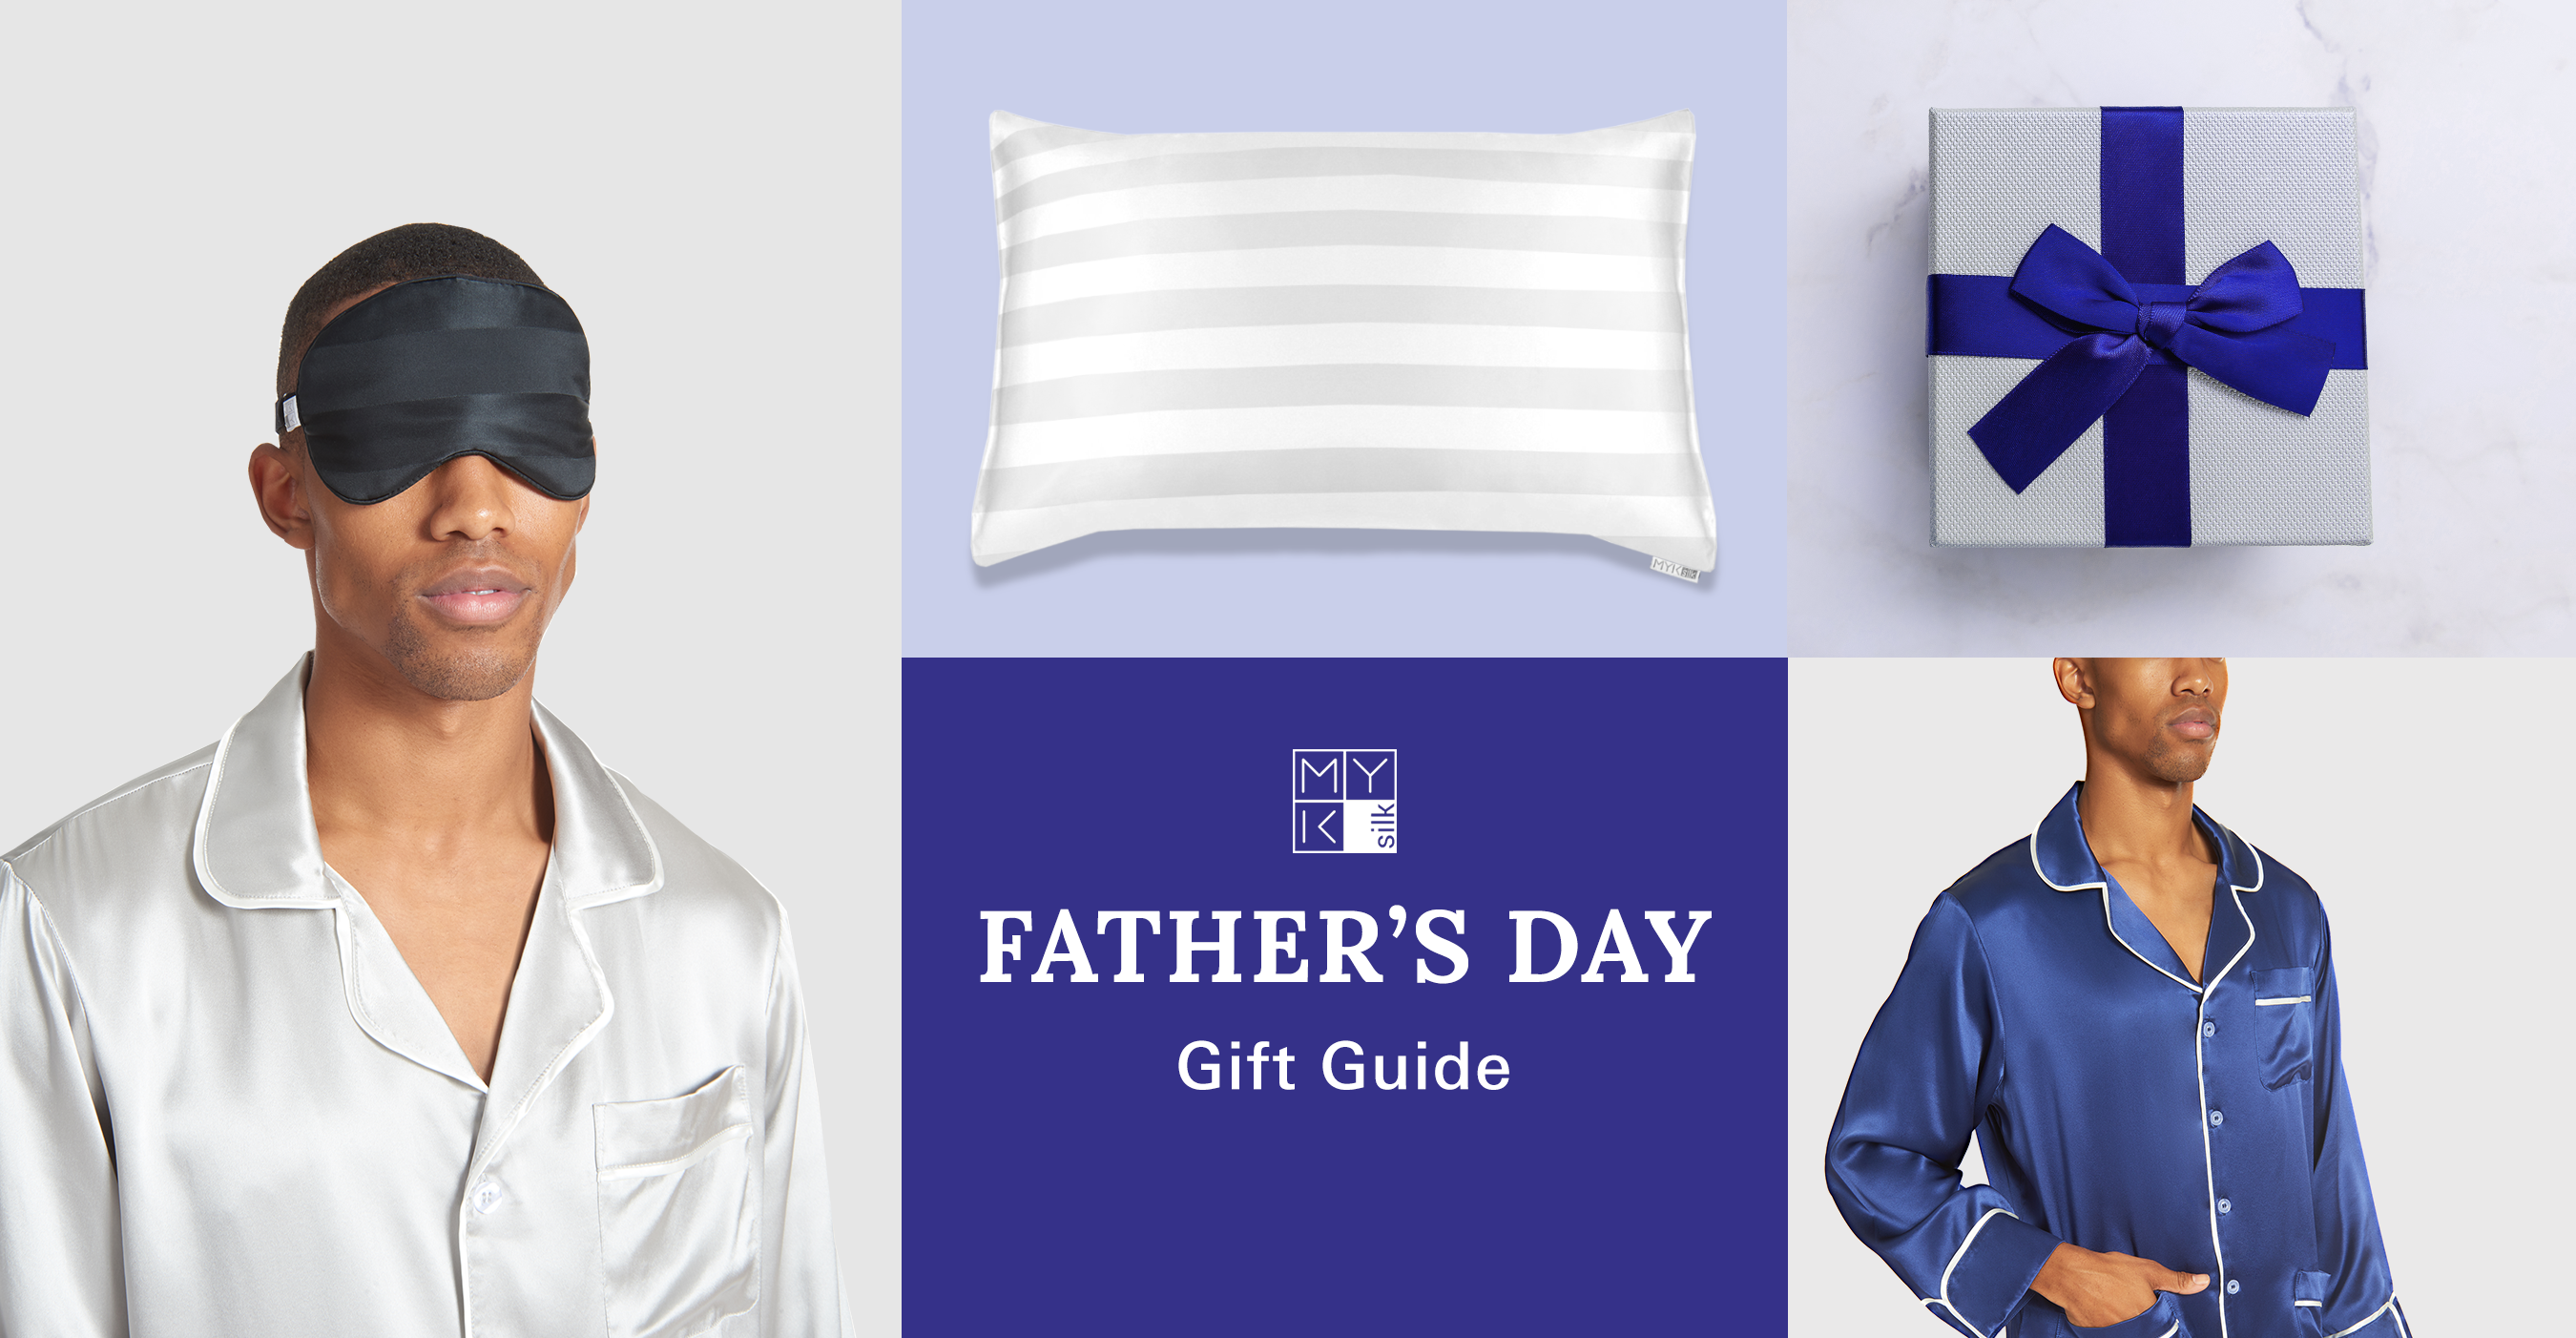 MYK Silk 2022 Father’s Day Gift Guide: Fun Things To Do To Celebrate Dad on Father’s Day